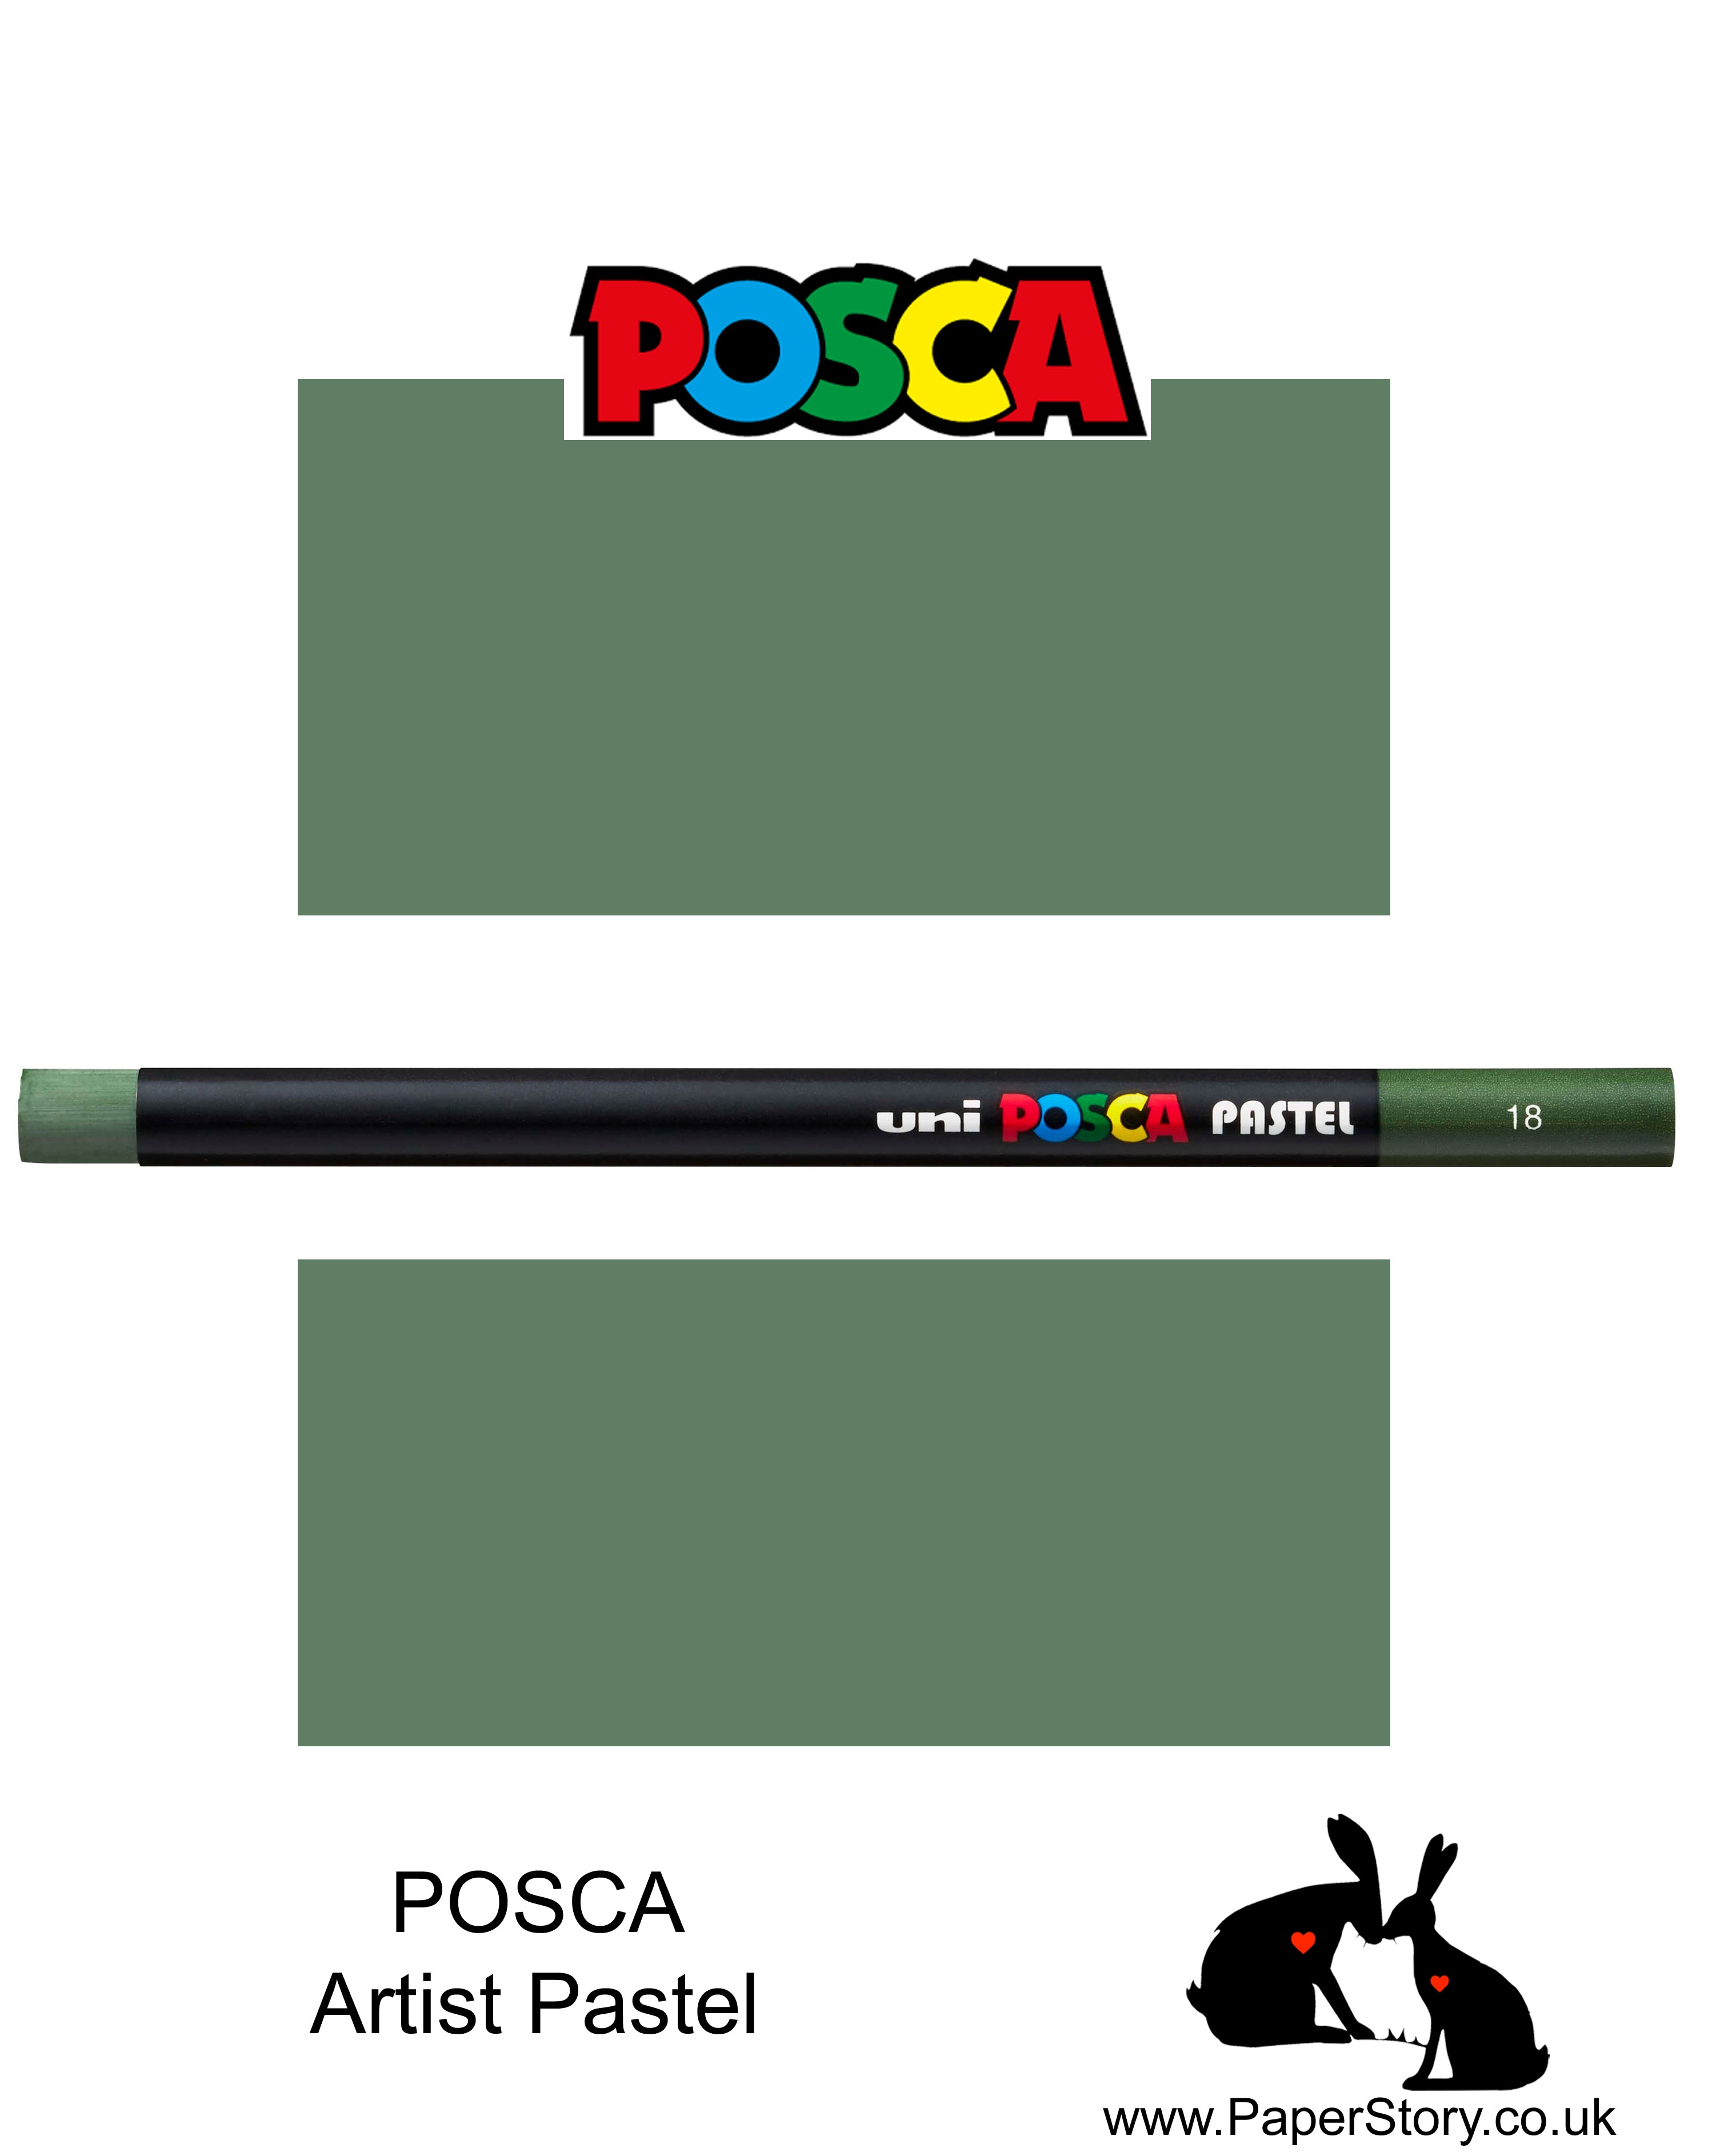 New Uni POSCA Pastels, Olive Green, these  new style wax and oil mixed pastel colours can be blended and overlaid, you can stipple, colour block, cross-hatch, scratch and outline. You can heat the sticks to create textured effects.